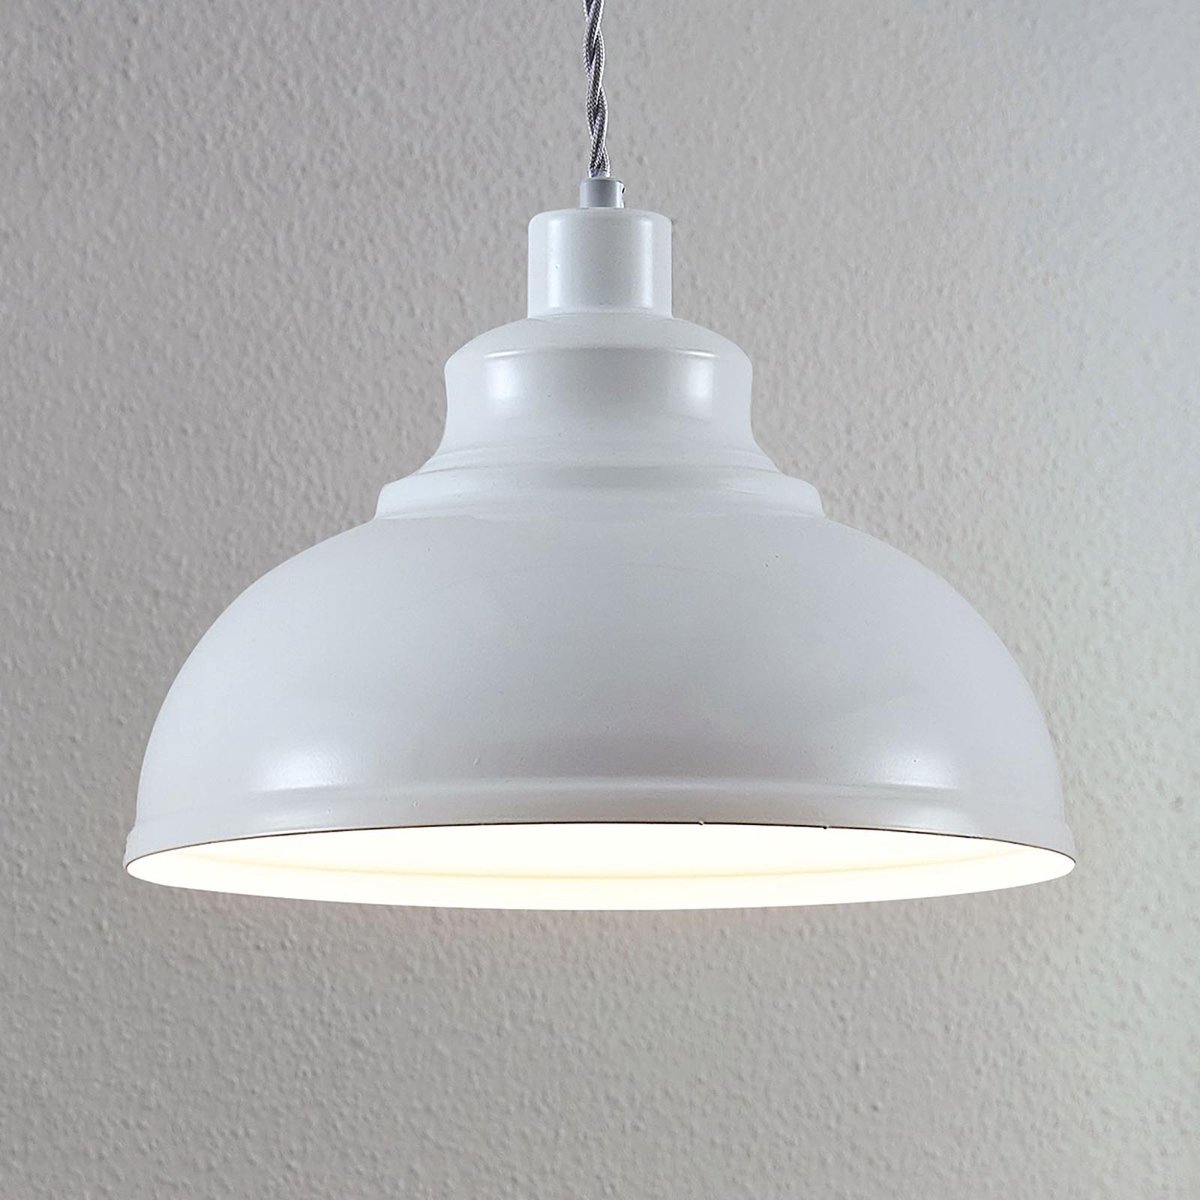 Lindby - hanglamp - 1licht - metaal - H: 19.7 cm - E27 - wit